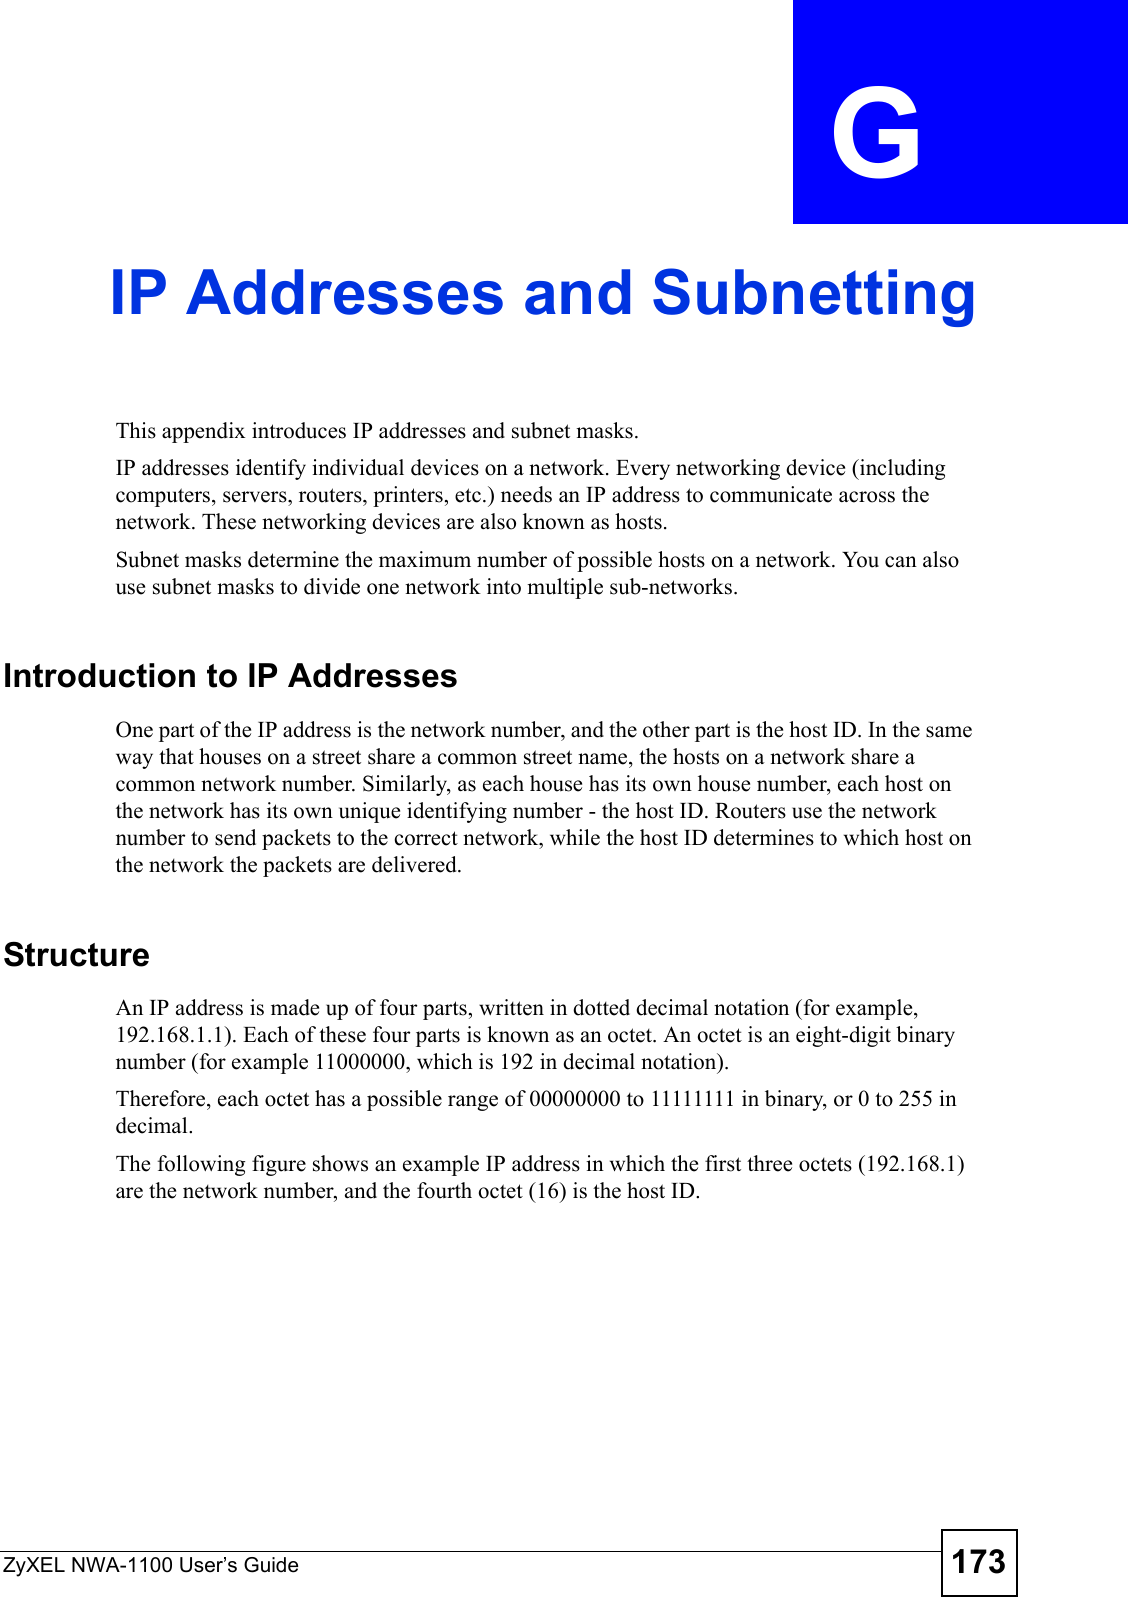 ZyXEL NWA-1100 User’s Guide 173APPENDIX  G IP Addresses and SubnettingThis appendix introduces IP addresses and subnet masks. IP addresses identify individual devices on a network. Every networking device (including computers, servers, routers, printers, etc.) needs an IP address to communicate across the network. These networking devices are also known as hosts.Subnet masks determine the maximum number of possible hosts on a network. You can also use subnet masks to divide one network into multiple sub-networks.Introduction to IP AddressesOne part of the IP address is the network number, and the other part is the host ID. In the same way that houses on a street share a common street name, the hosts on a network share a common network number. Similarly, as each house has its own house number, each host on the network has its own unique identifying number - the host ID. Routers use the network number to send packets to the correct network, while the host ID determines to which host on the network the packets are delivered.StructureAn IP address is made up of four parts, written in dotted decimal notation (for example, 192.168.1.1). Each of these four parts is known as an octet. An octet is an eight-digit binary number (for example 11000000, which is 192 in decimal notation). Therefore, each octet has a possible range of 00000000 to 11111111 in binary, or 0 to 255 in decimal.The following figure shows an example IP address in which the first three octets (192.168.1) are the network number, and the fourth octet (16) is the host ID.